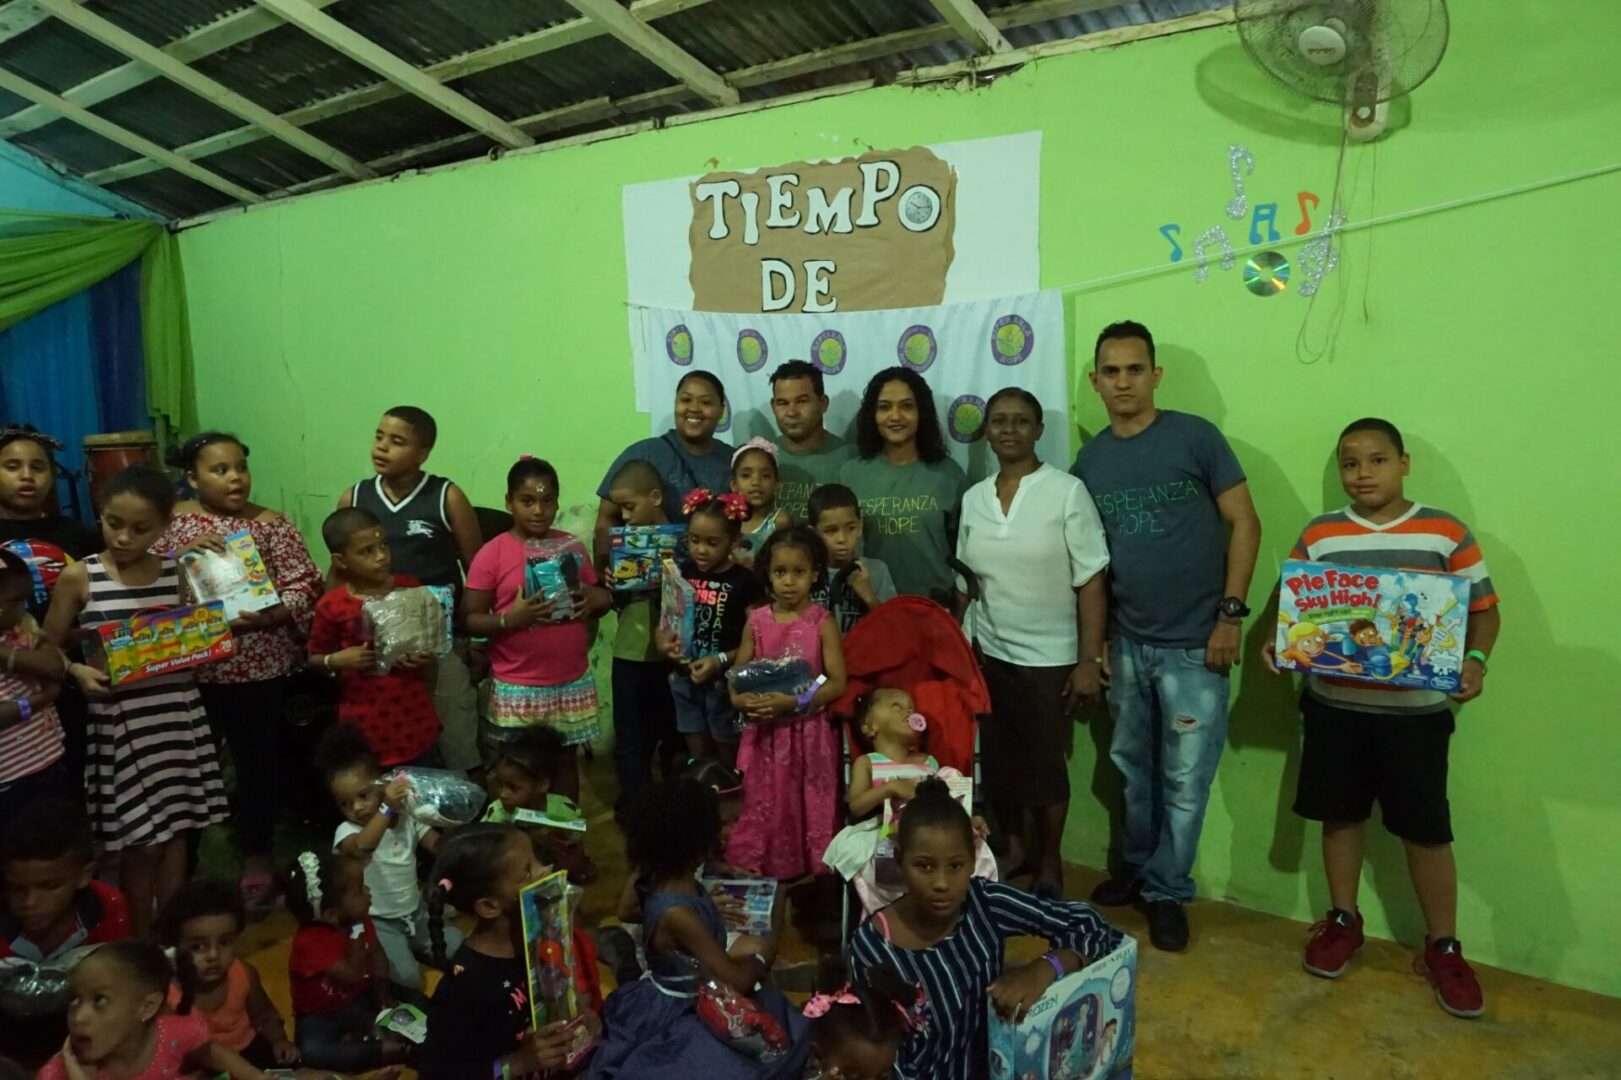 The staff and some of the adults from the Iglesia; the children beside them